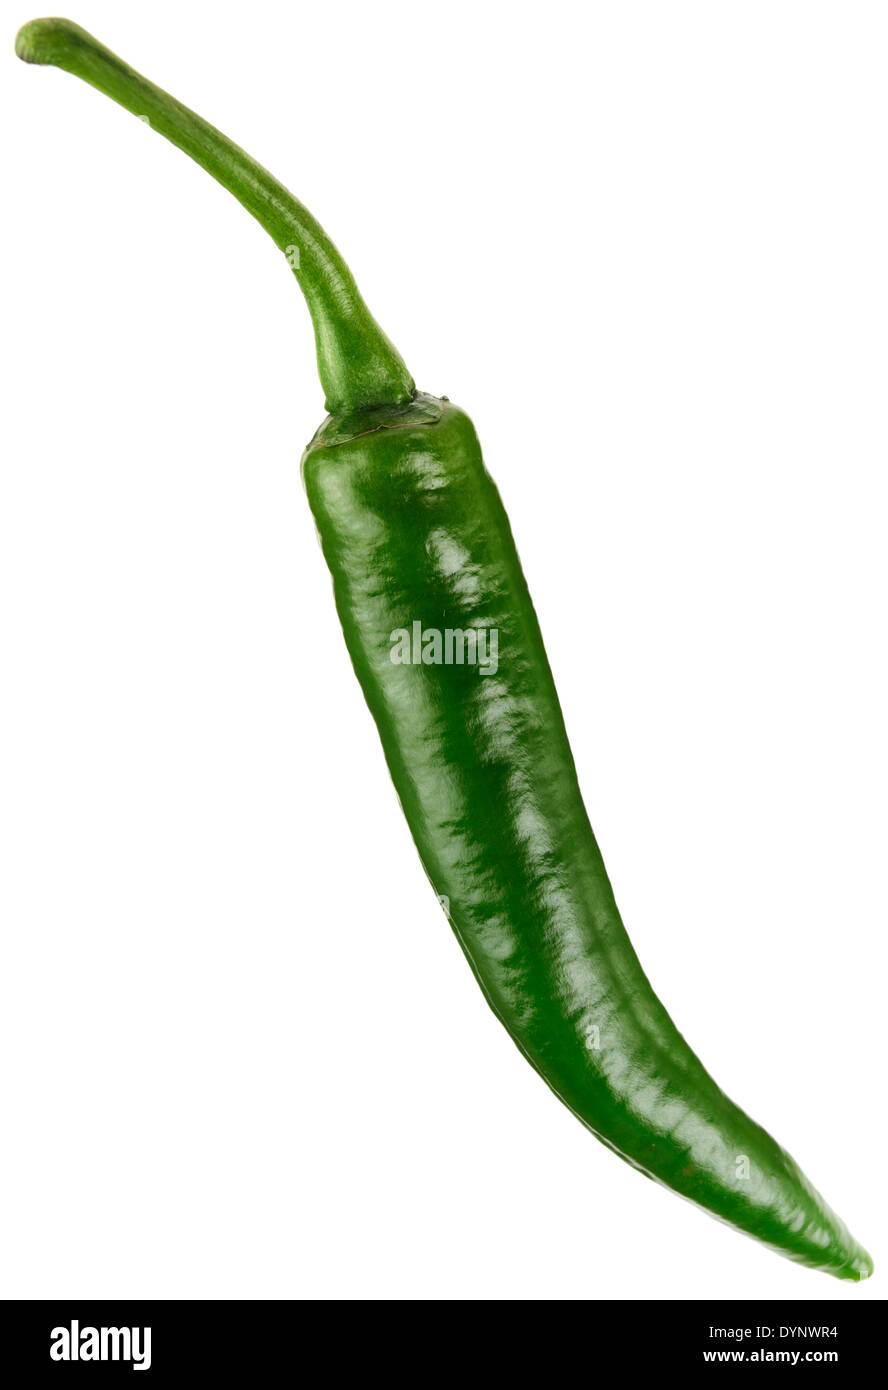 A GREEN CHILI PEPPER ON A WHITE BACKGROUND Stock Photo